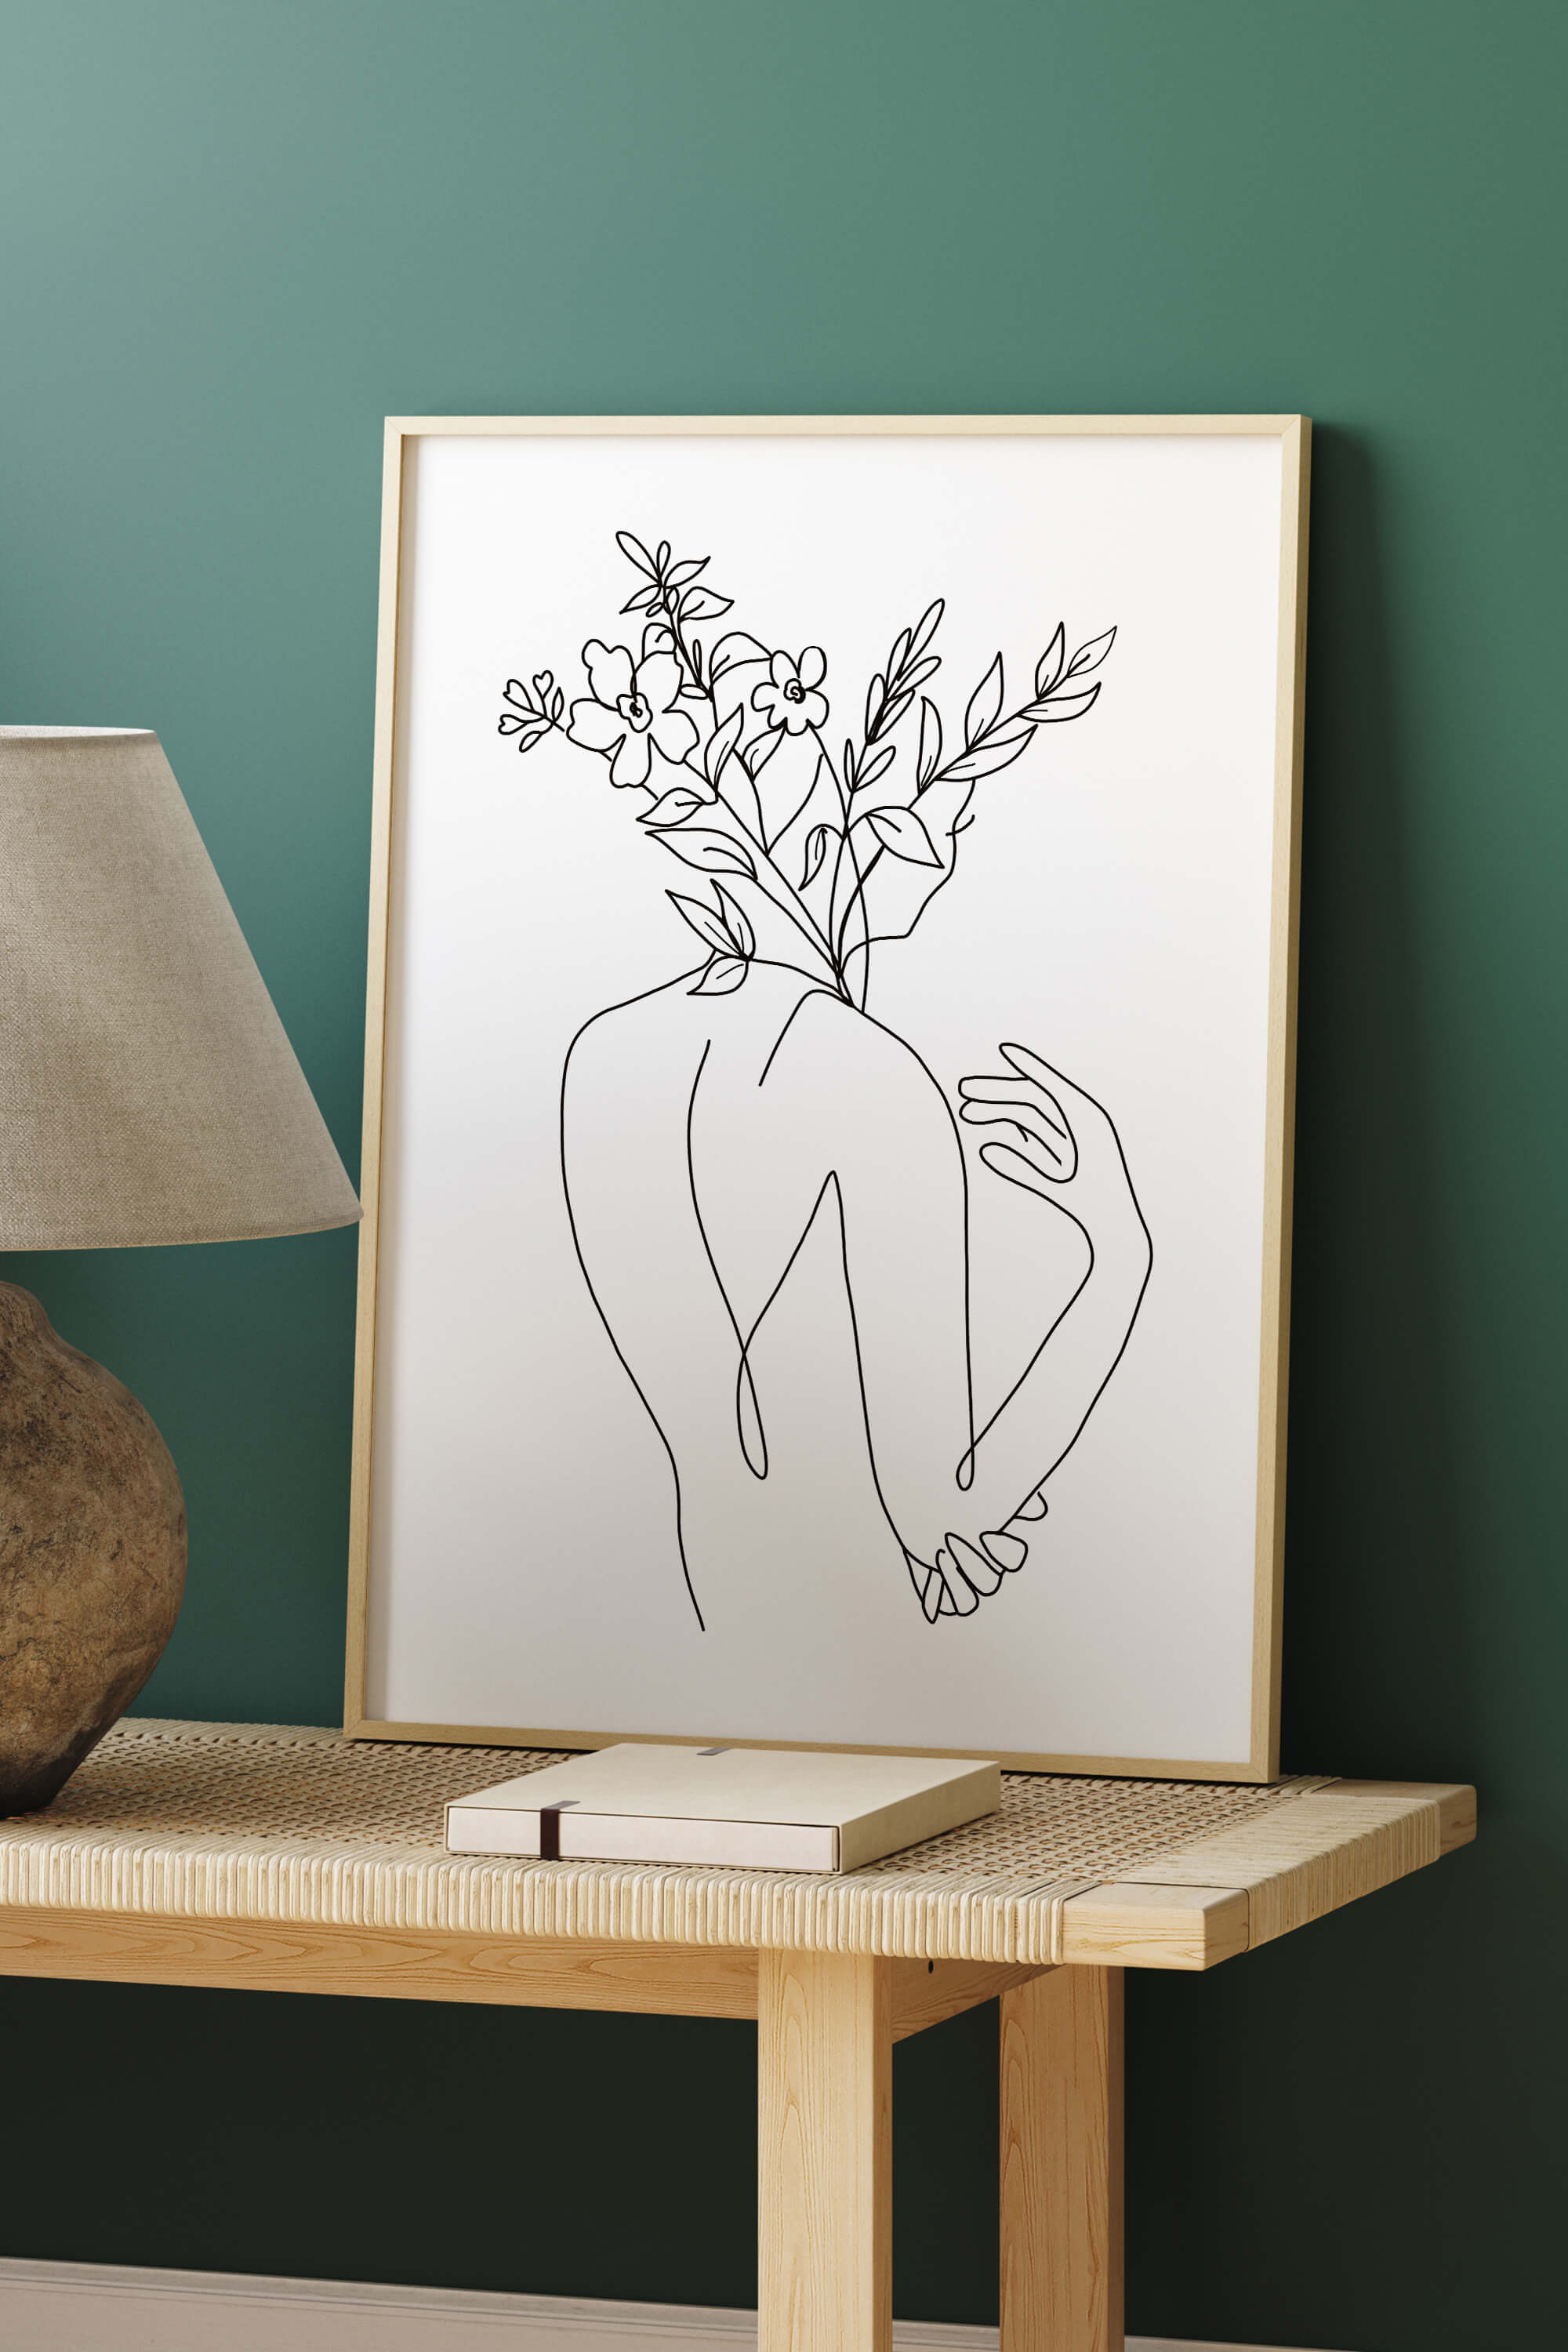 Limited edition botanical woman art print for the bedroom. The image blends cultural themes with nature-inspired elements, creating a piece that tells a unique story. Own this exclusive beauty for a touch of sophistication.